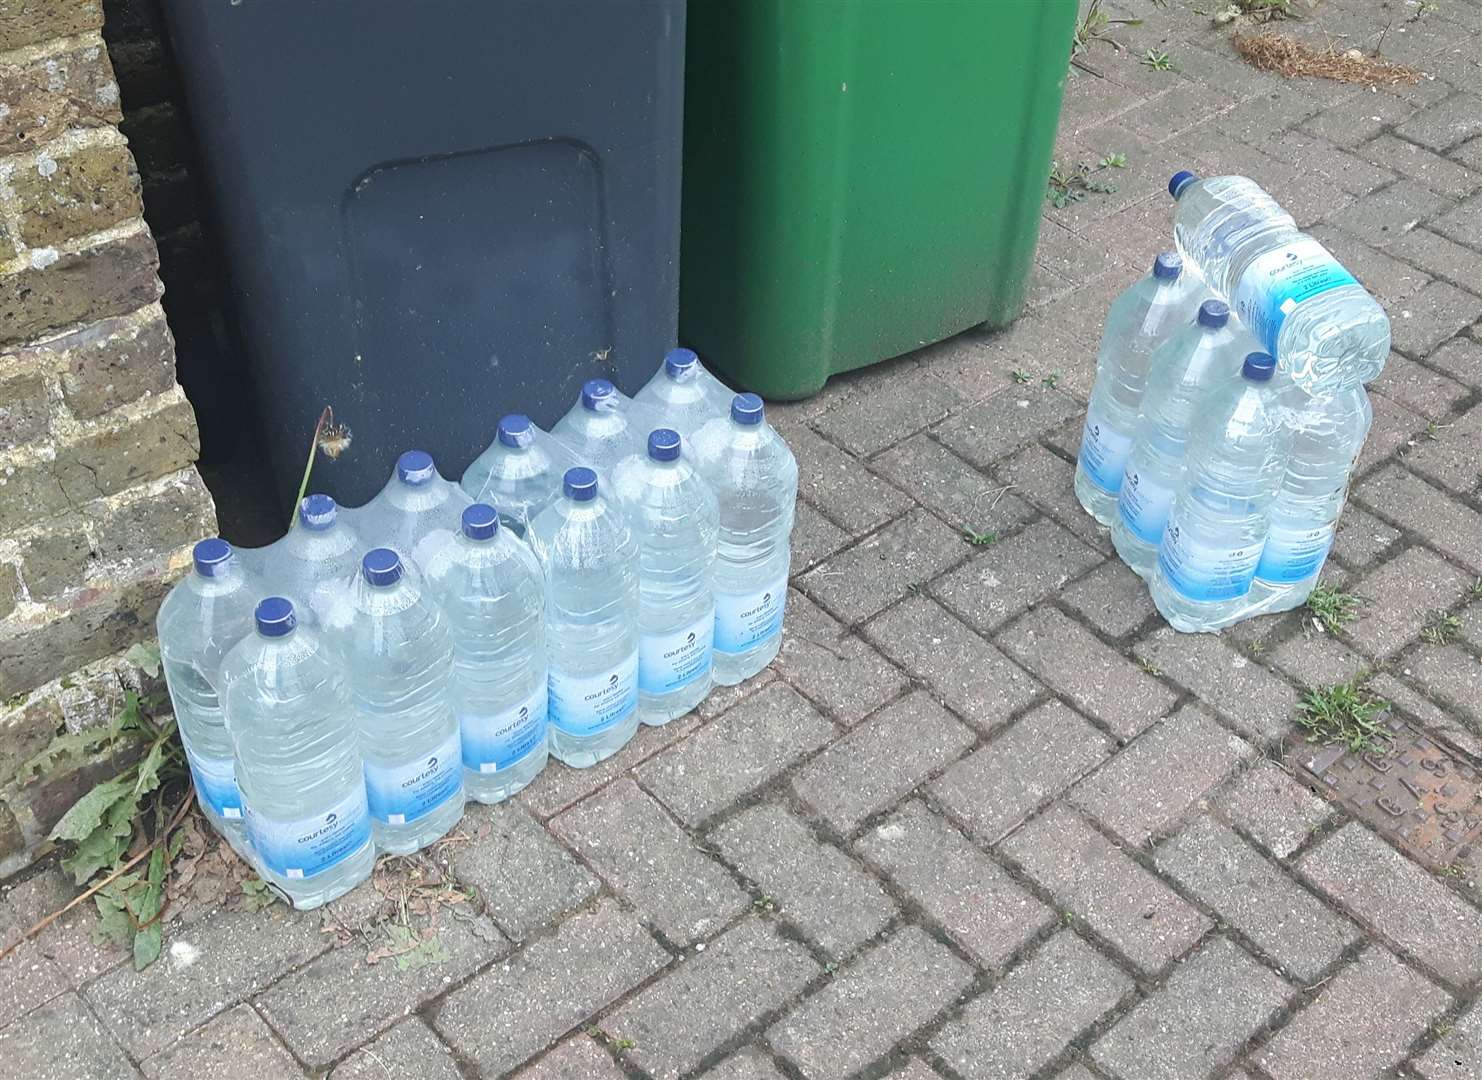 Southern Water is to distribute bottles to residents after a pipe burst